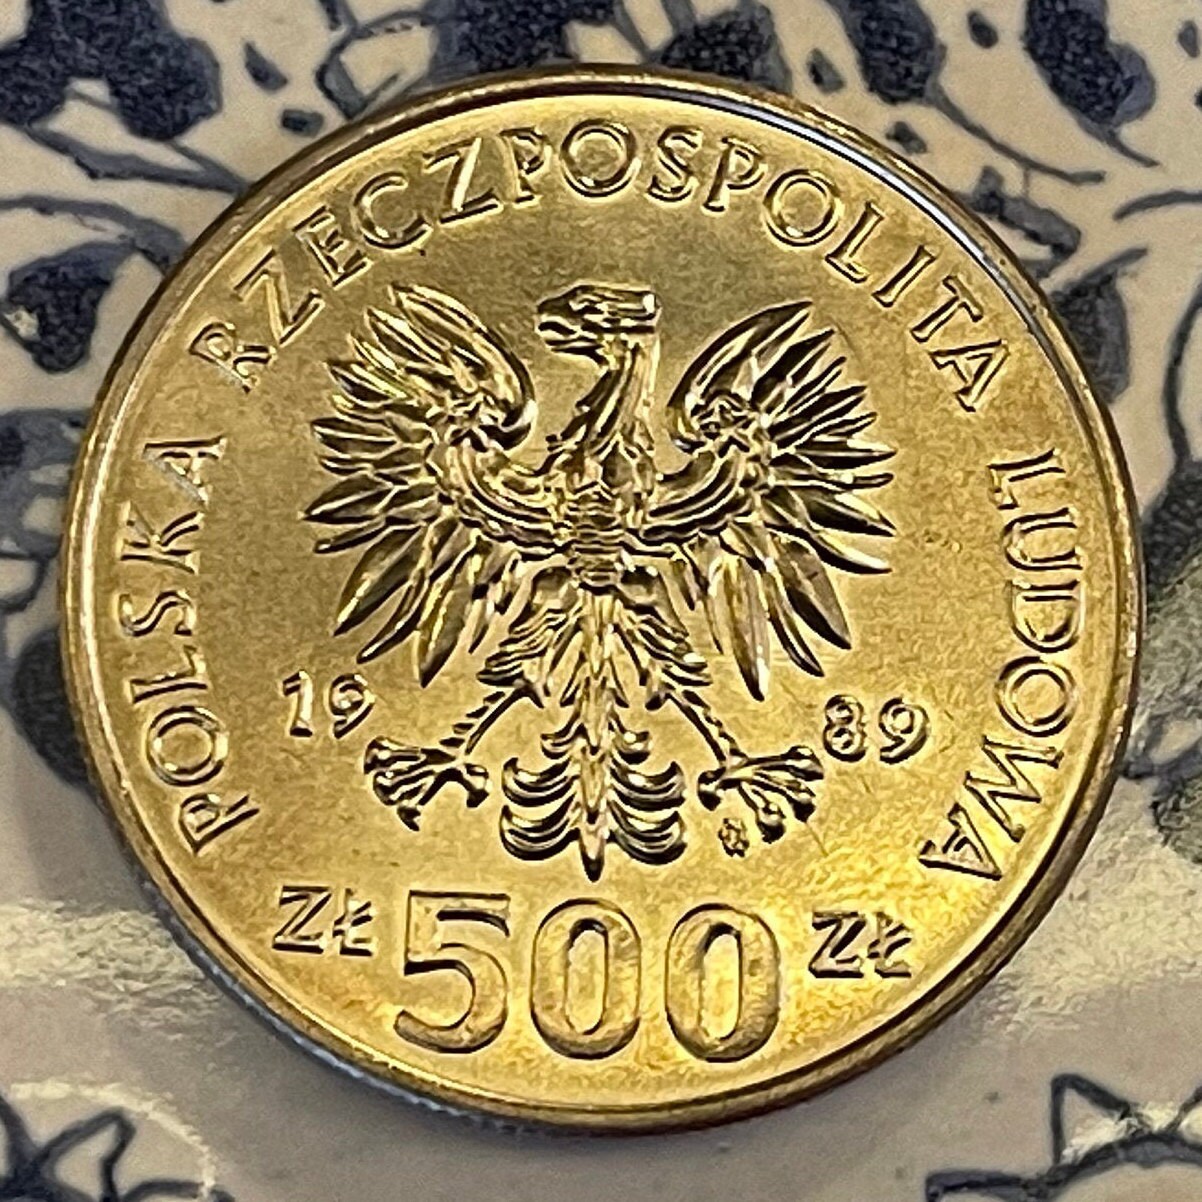 Polish Resistance World War II Invasion 500 Zlotych Poland Authentic Coin Money for Jewelry and Craft Making (Soldiers) (Allies) (1989)